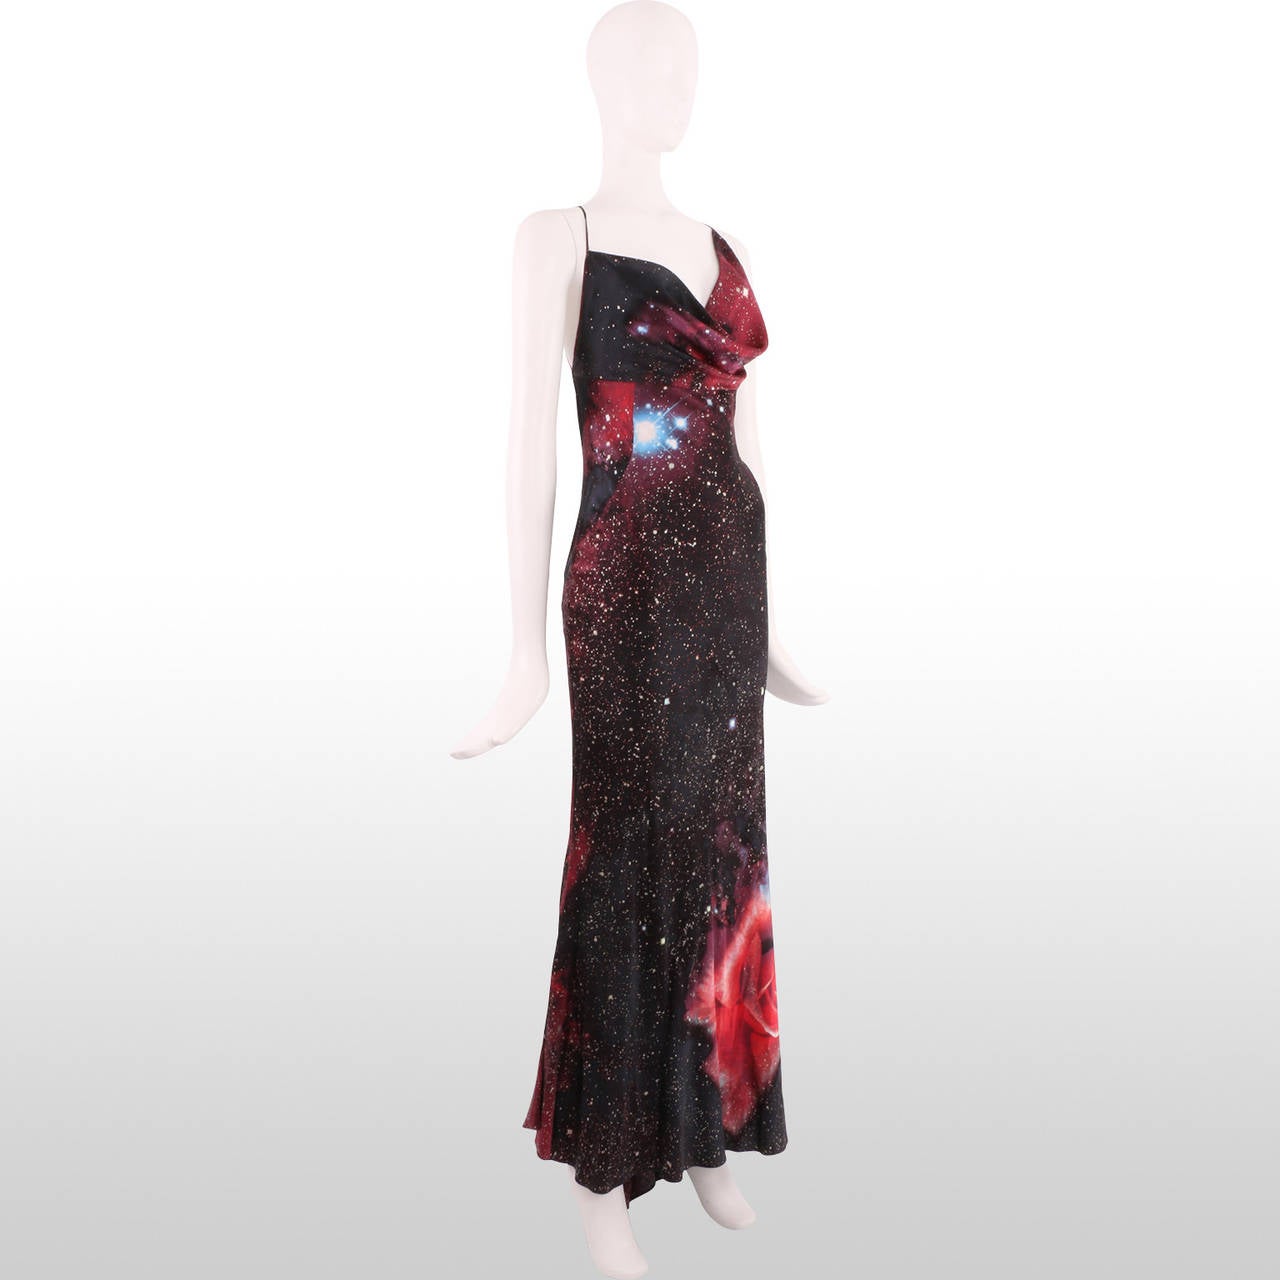 This gown's striking prints are Cavalli's interpretation of heavenly bodies. Galactic swirls of stars and planets with cosmic roses thrown in for quirkiness.  The silk satin feels slinky on the body and drapes beautifully. The back of the gown